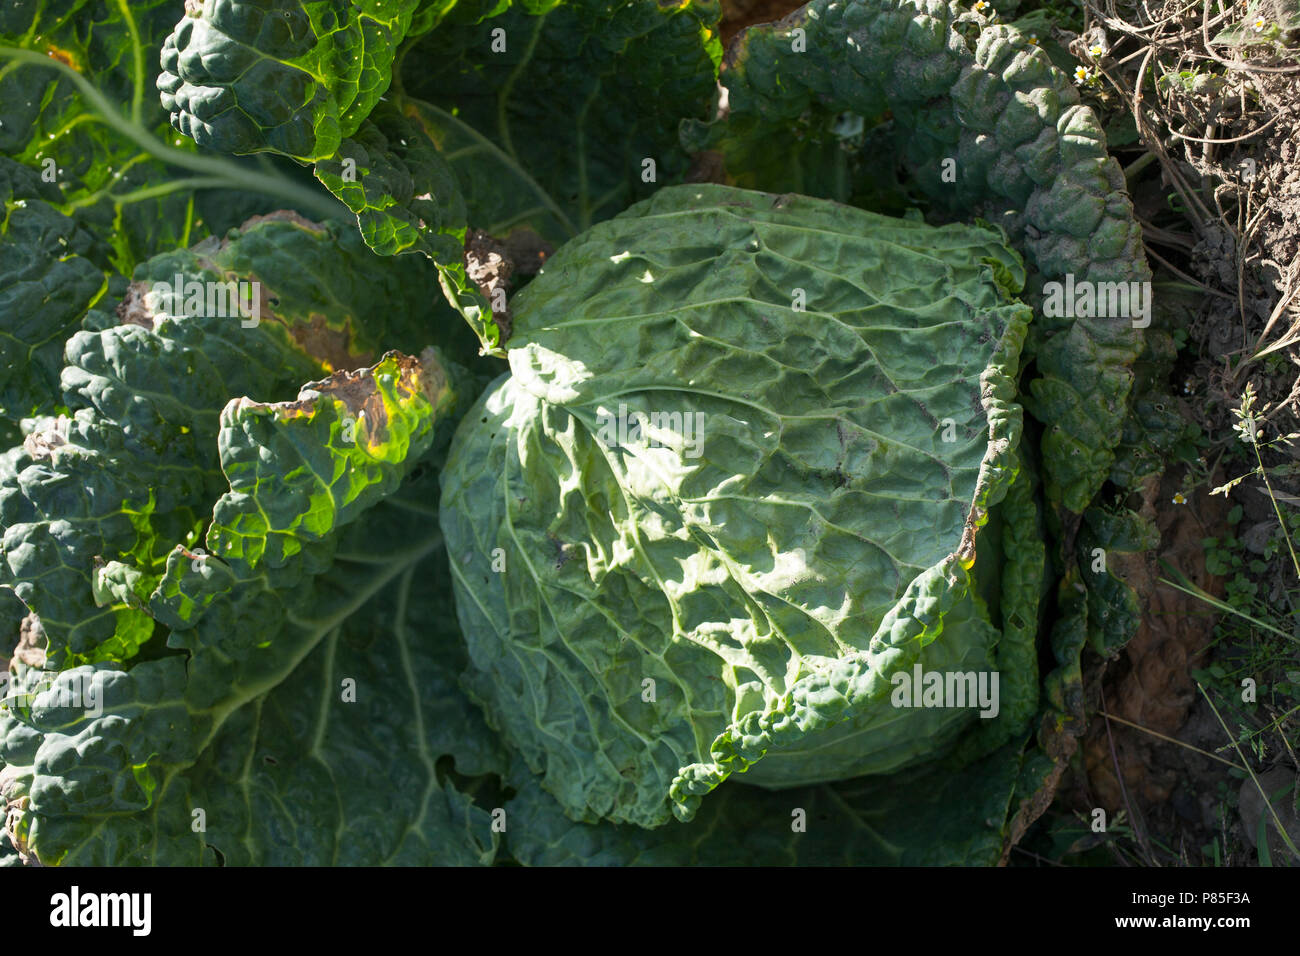 A head of cabbage growing in a garden. Stock Photo